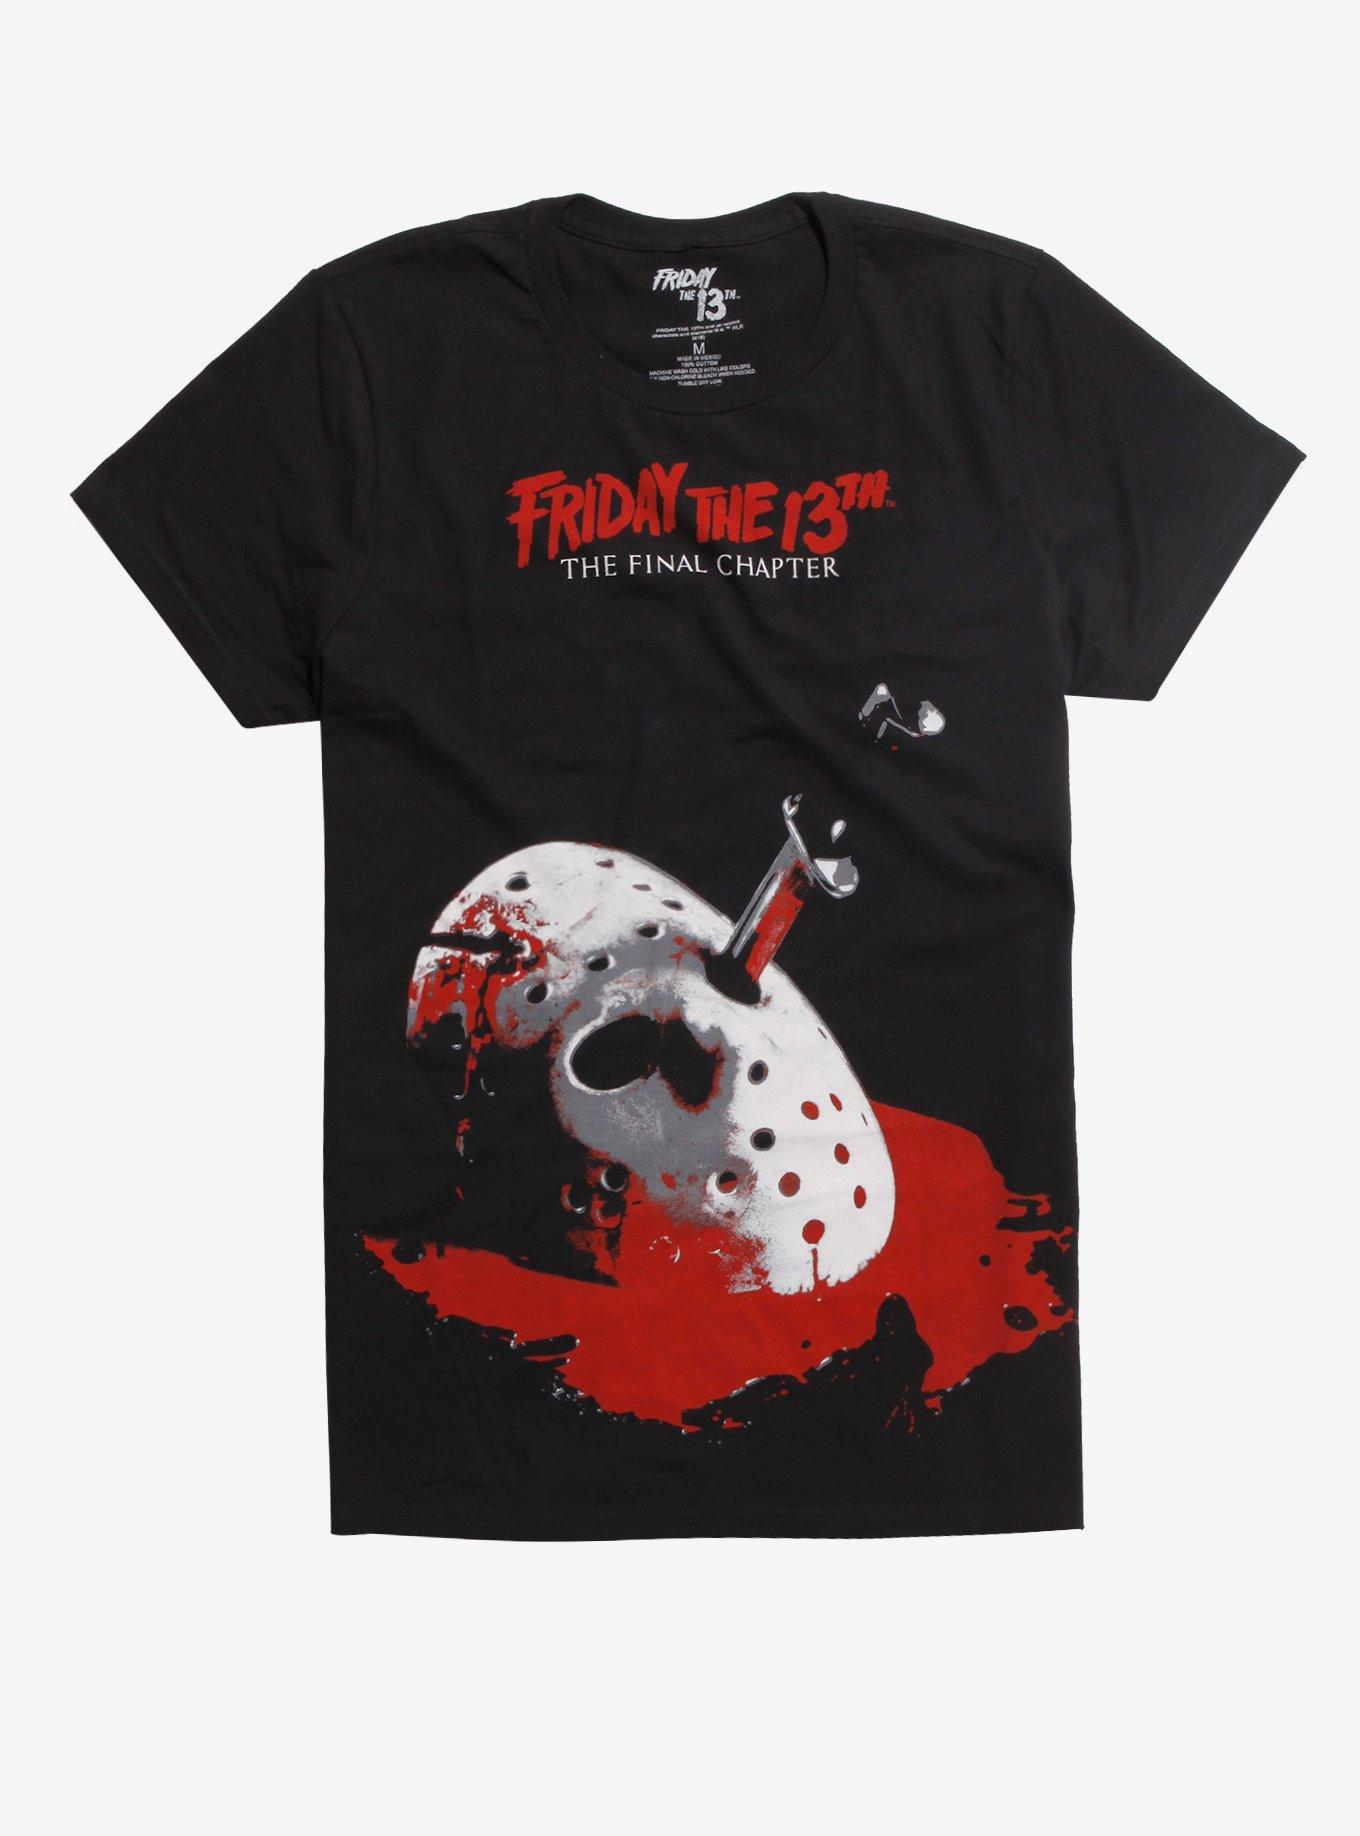 Friday The 13th: The Final Chapter Poster T-Shirt, RED, hi-res